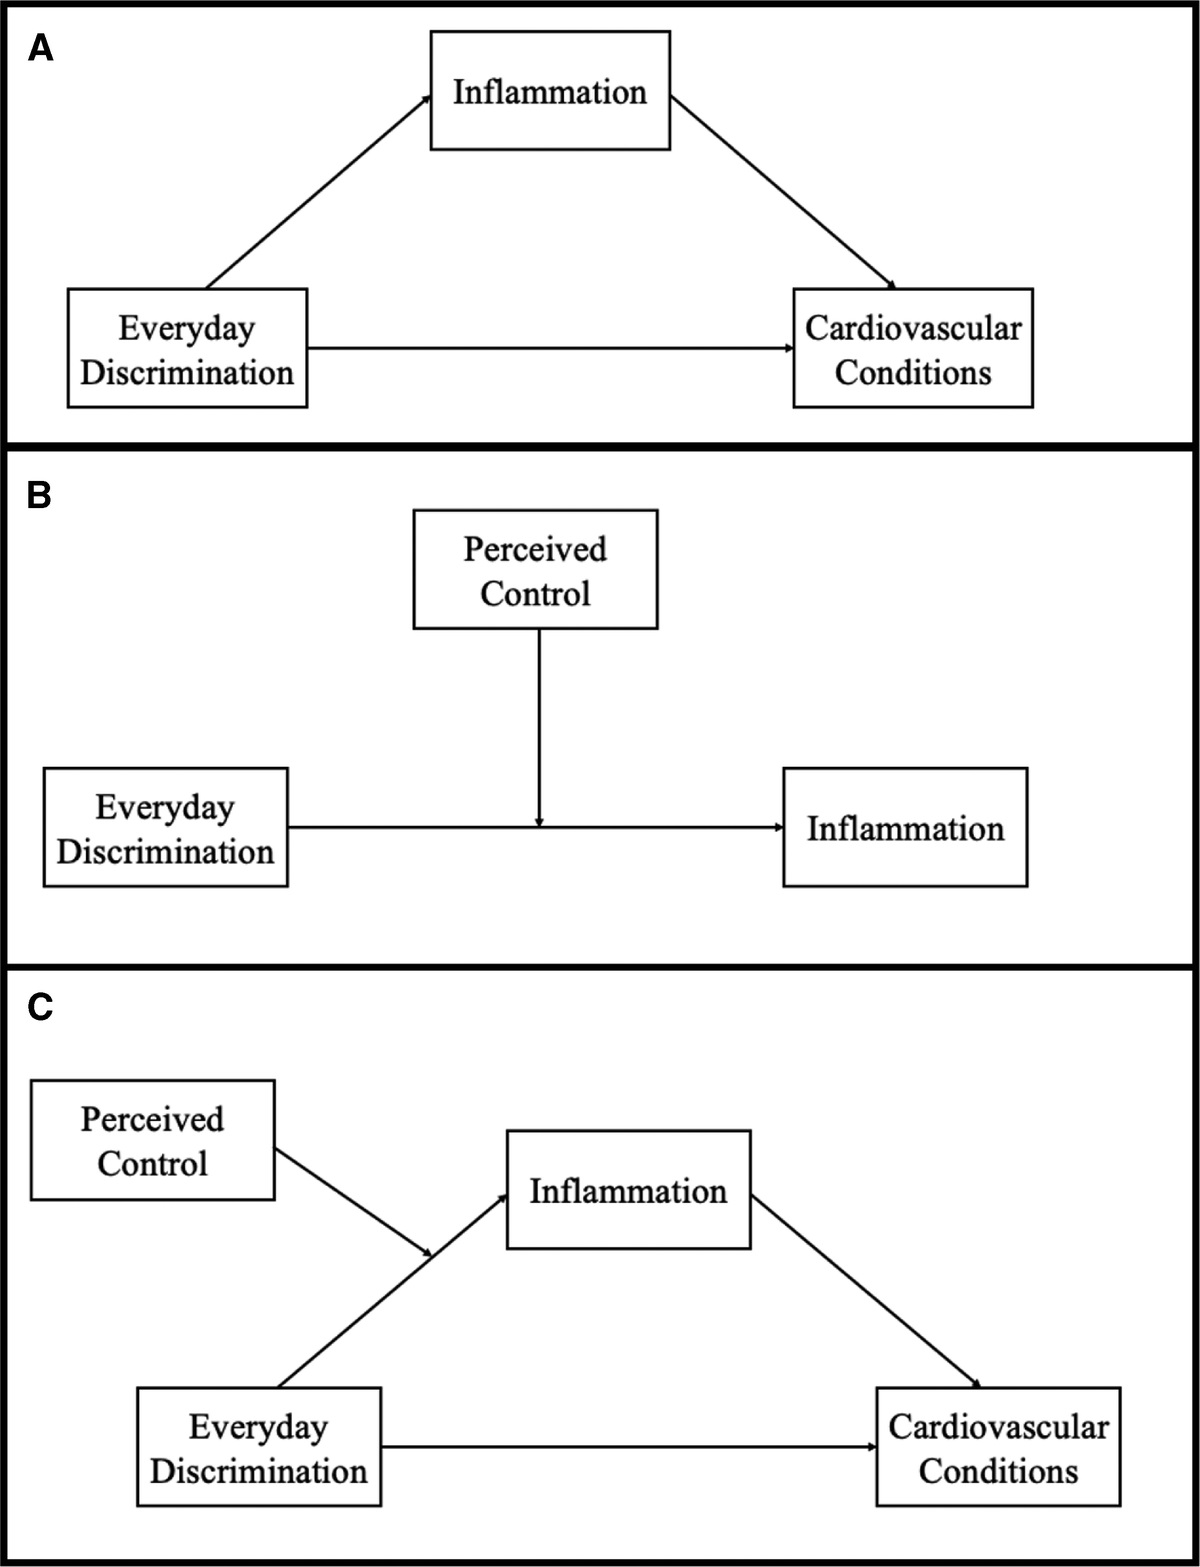 Discrimination and Cardiovascular Health in Black Americans: Exploring Inflammation as a Mechanism and Perceived Control as a Protective Factor